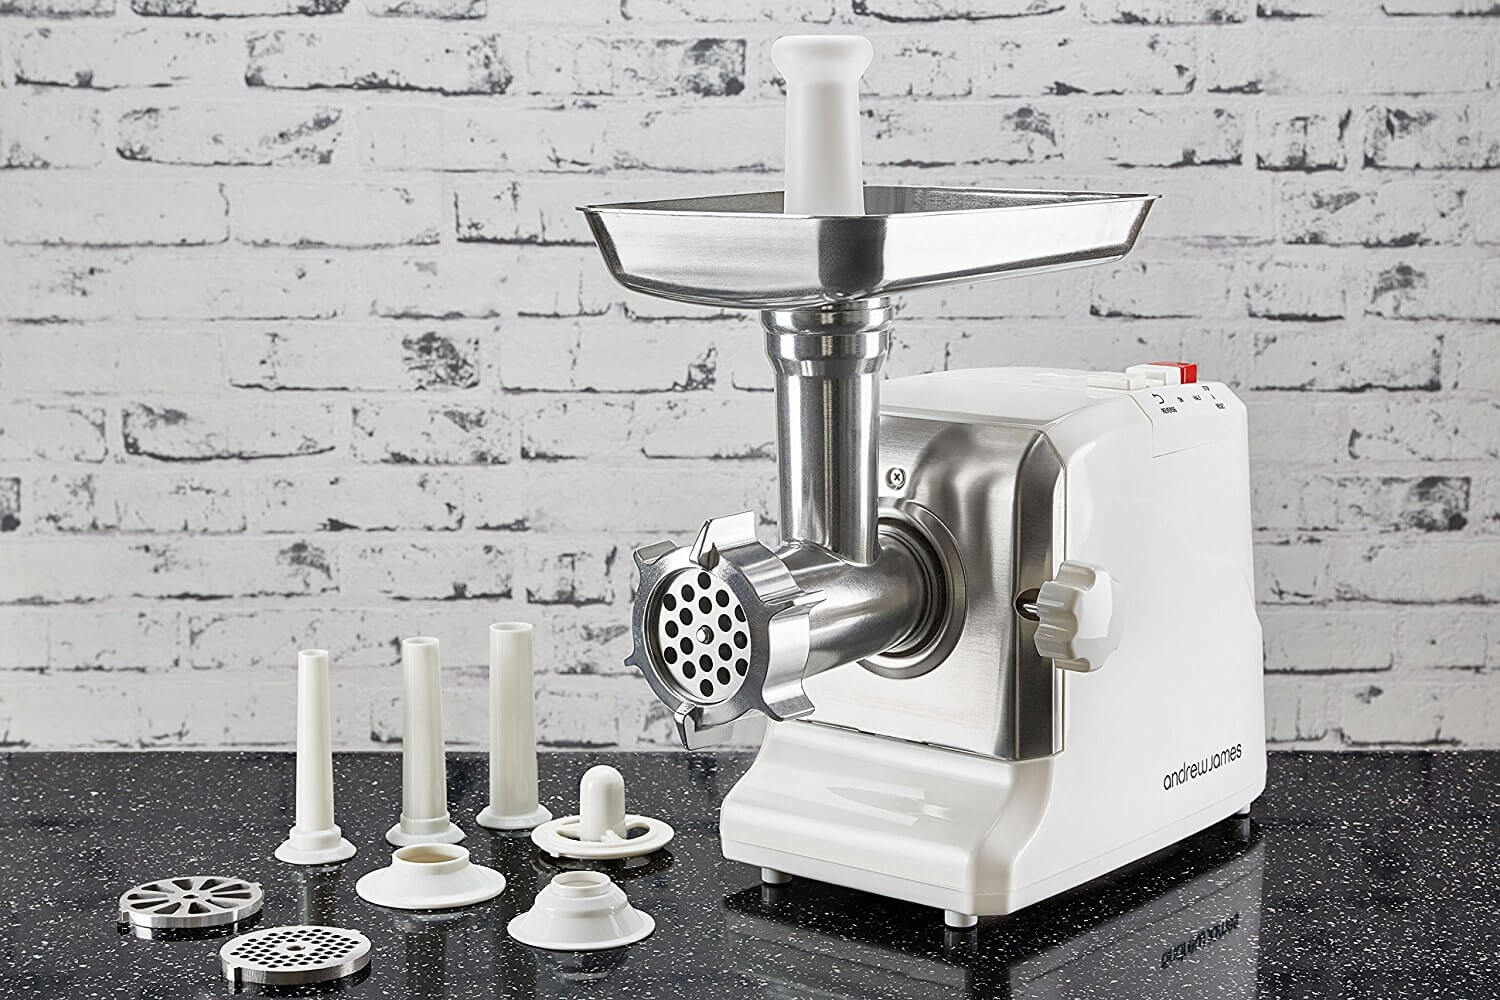 8 Best Meat Grinders - When Grinding Is Just A Piece of Cake